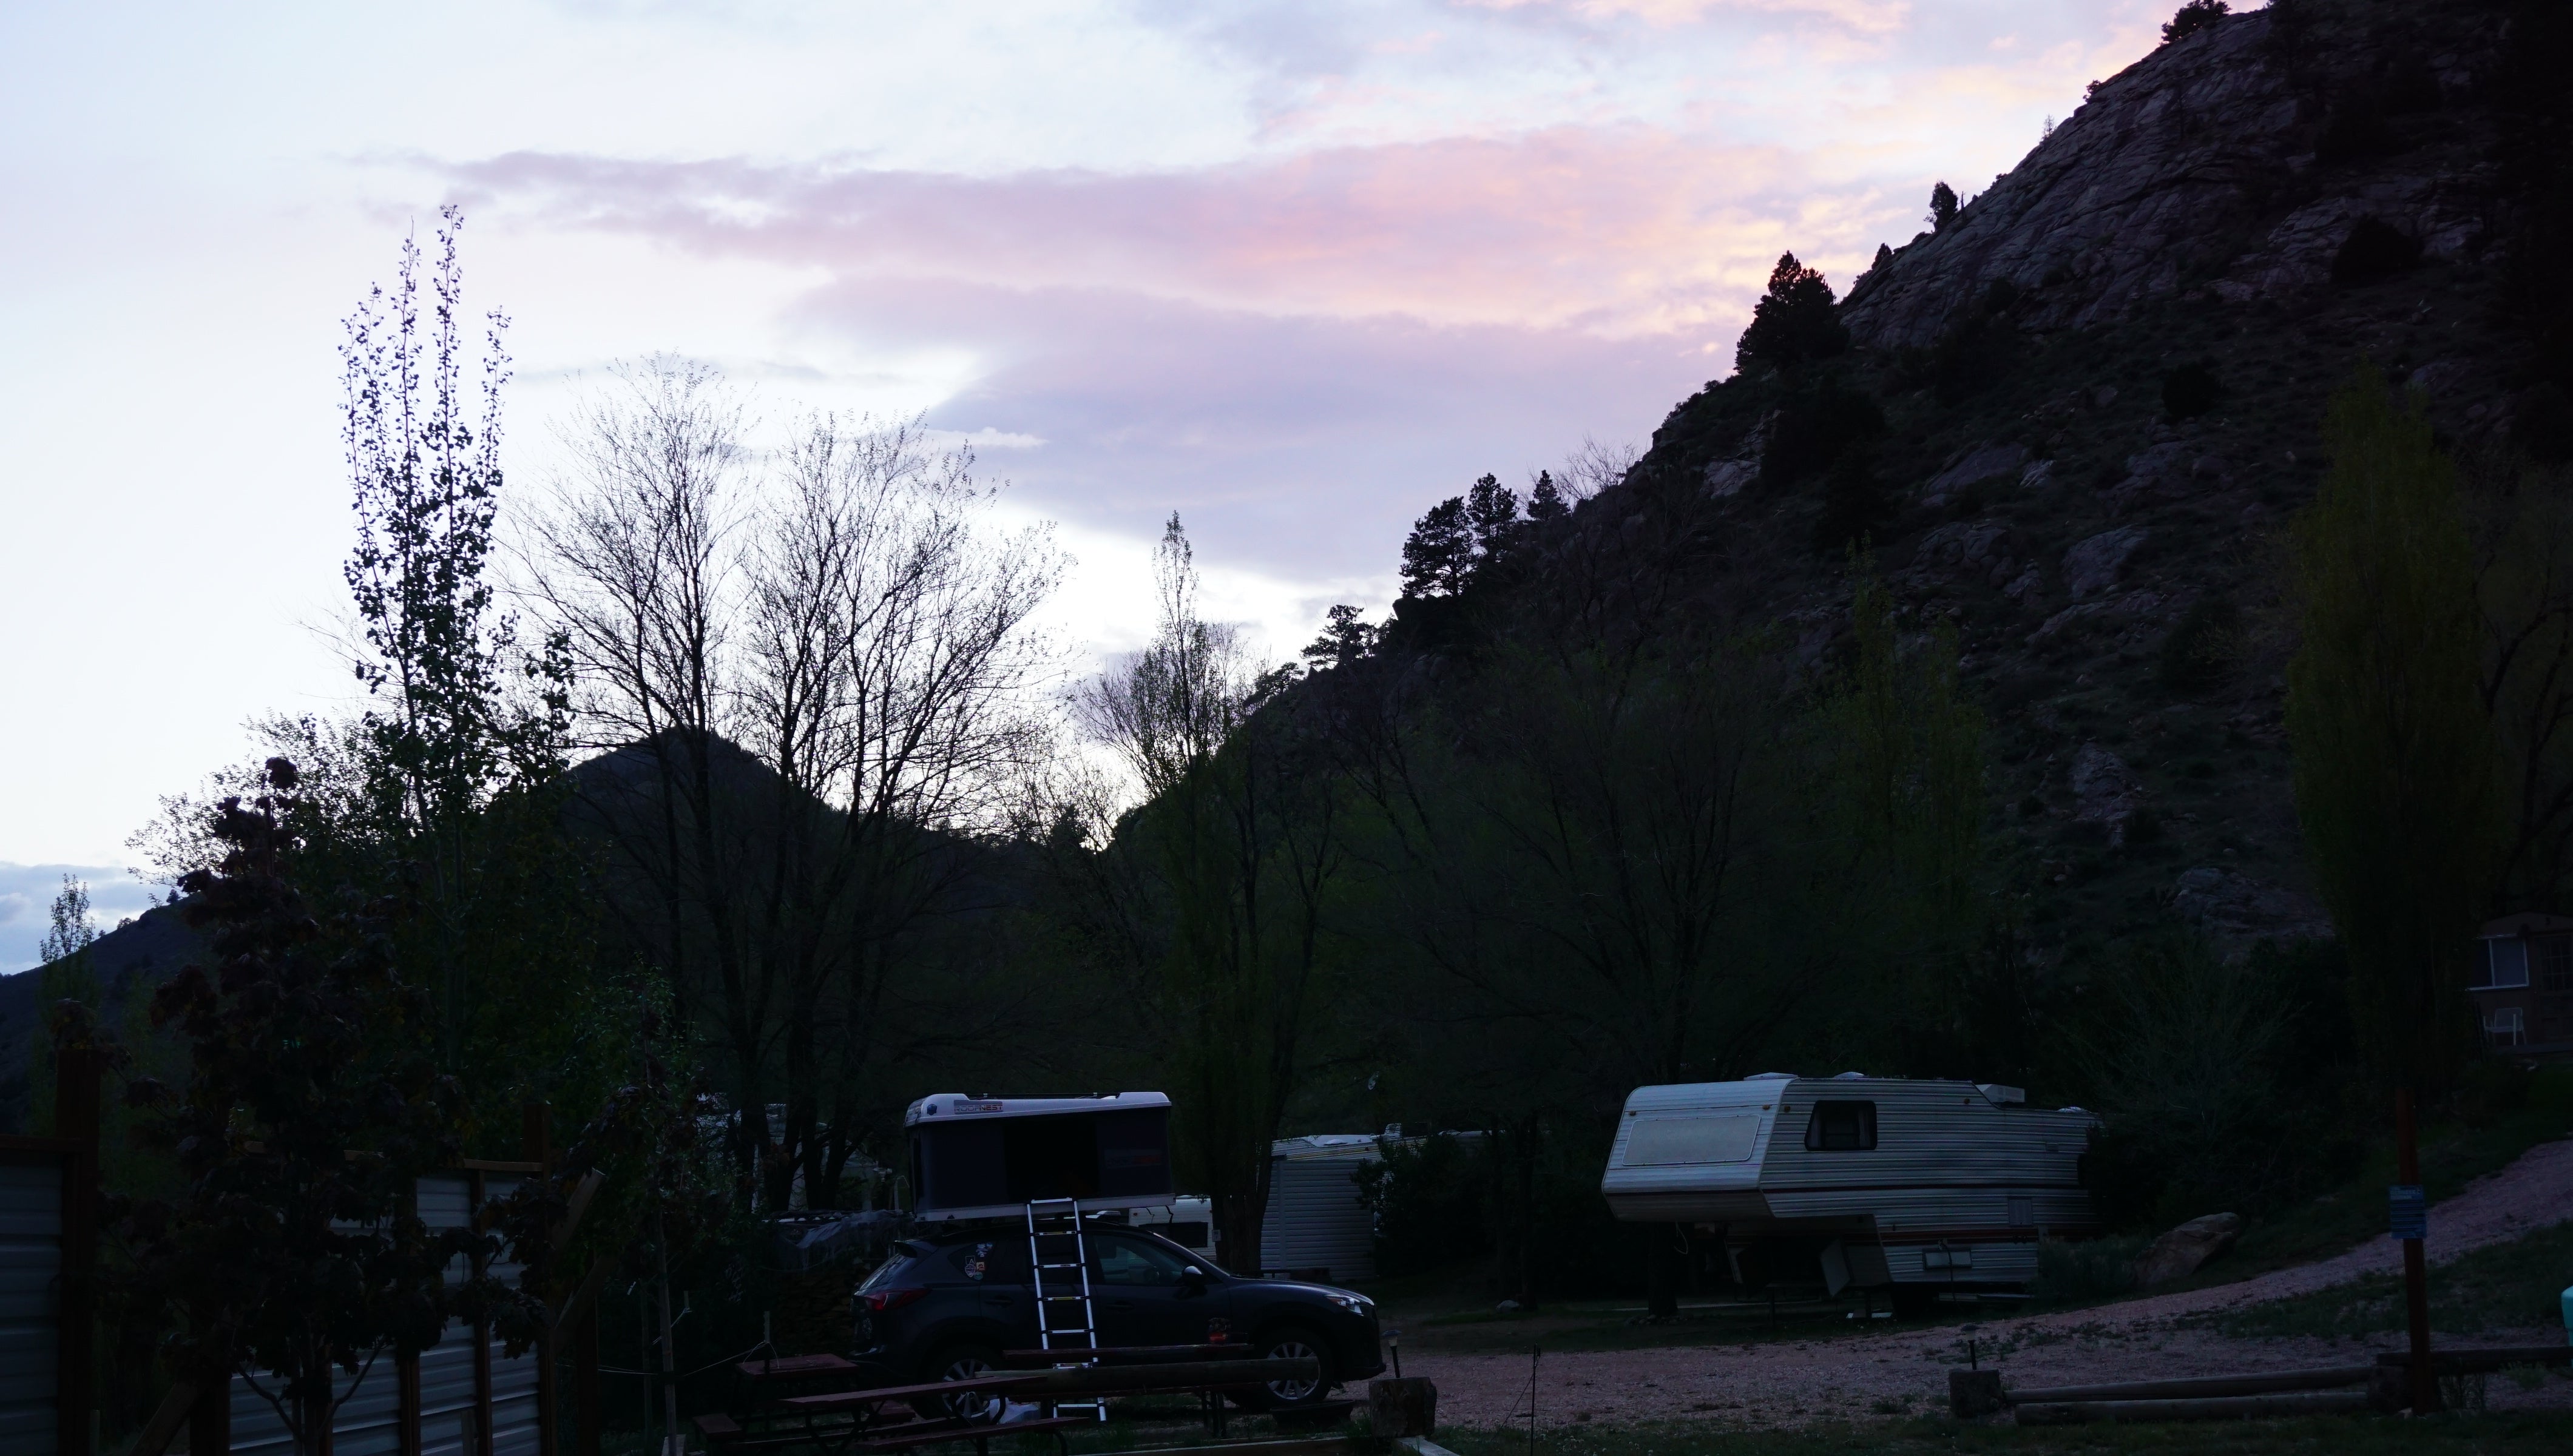 sunset in the canyon near my campsite